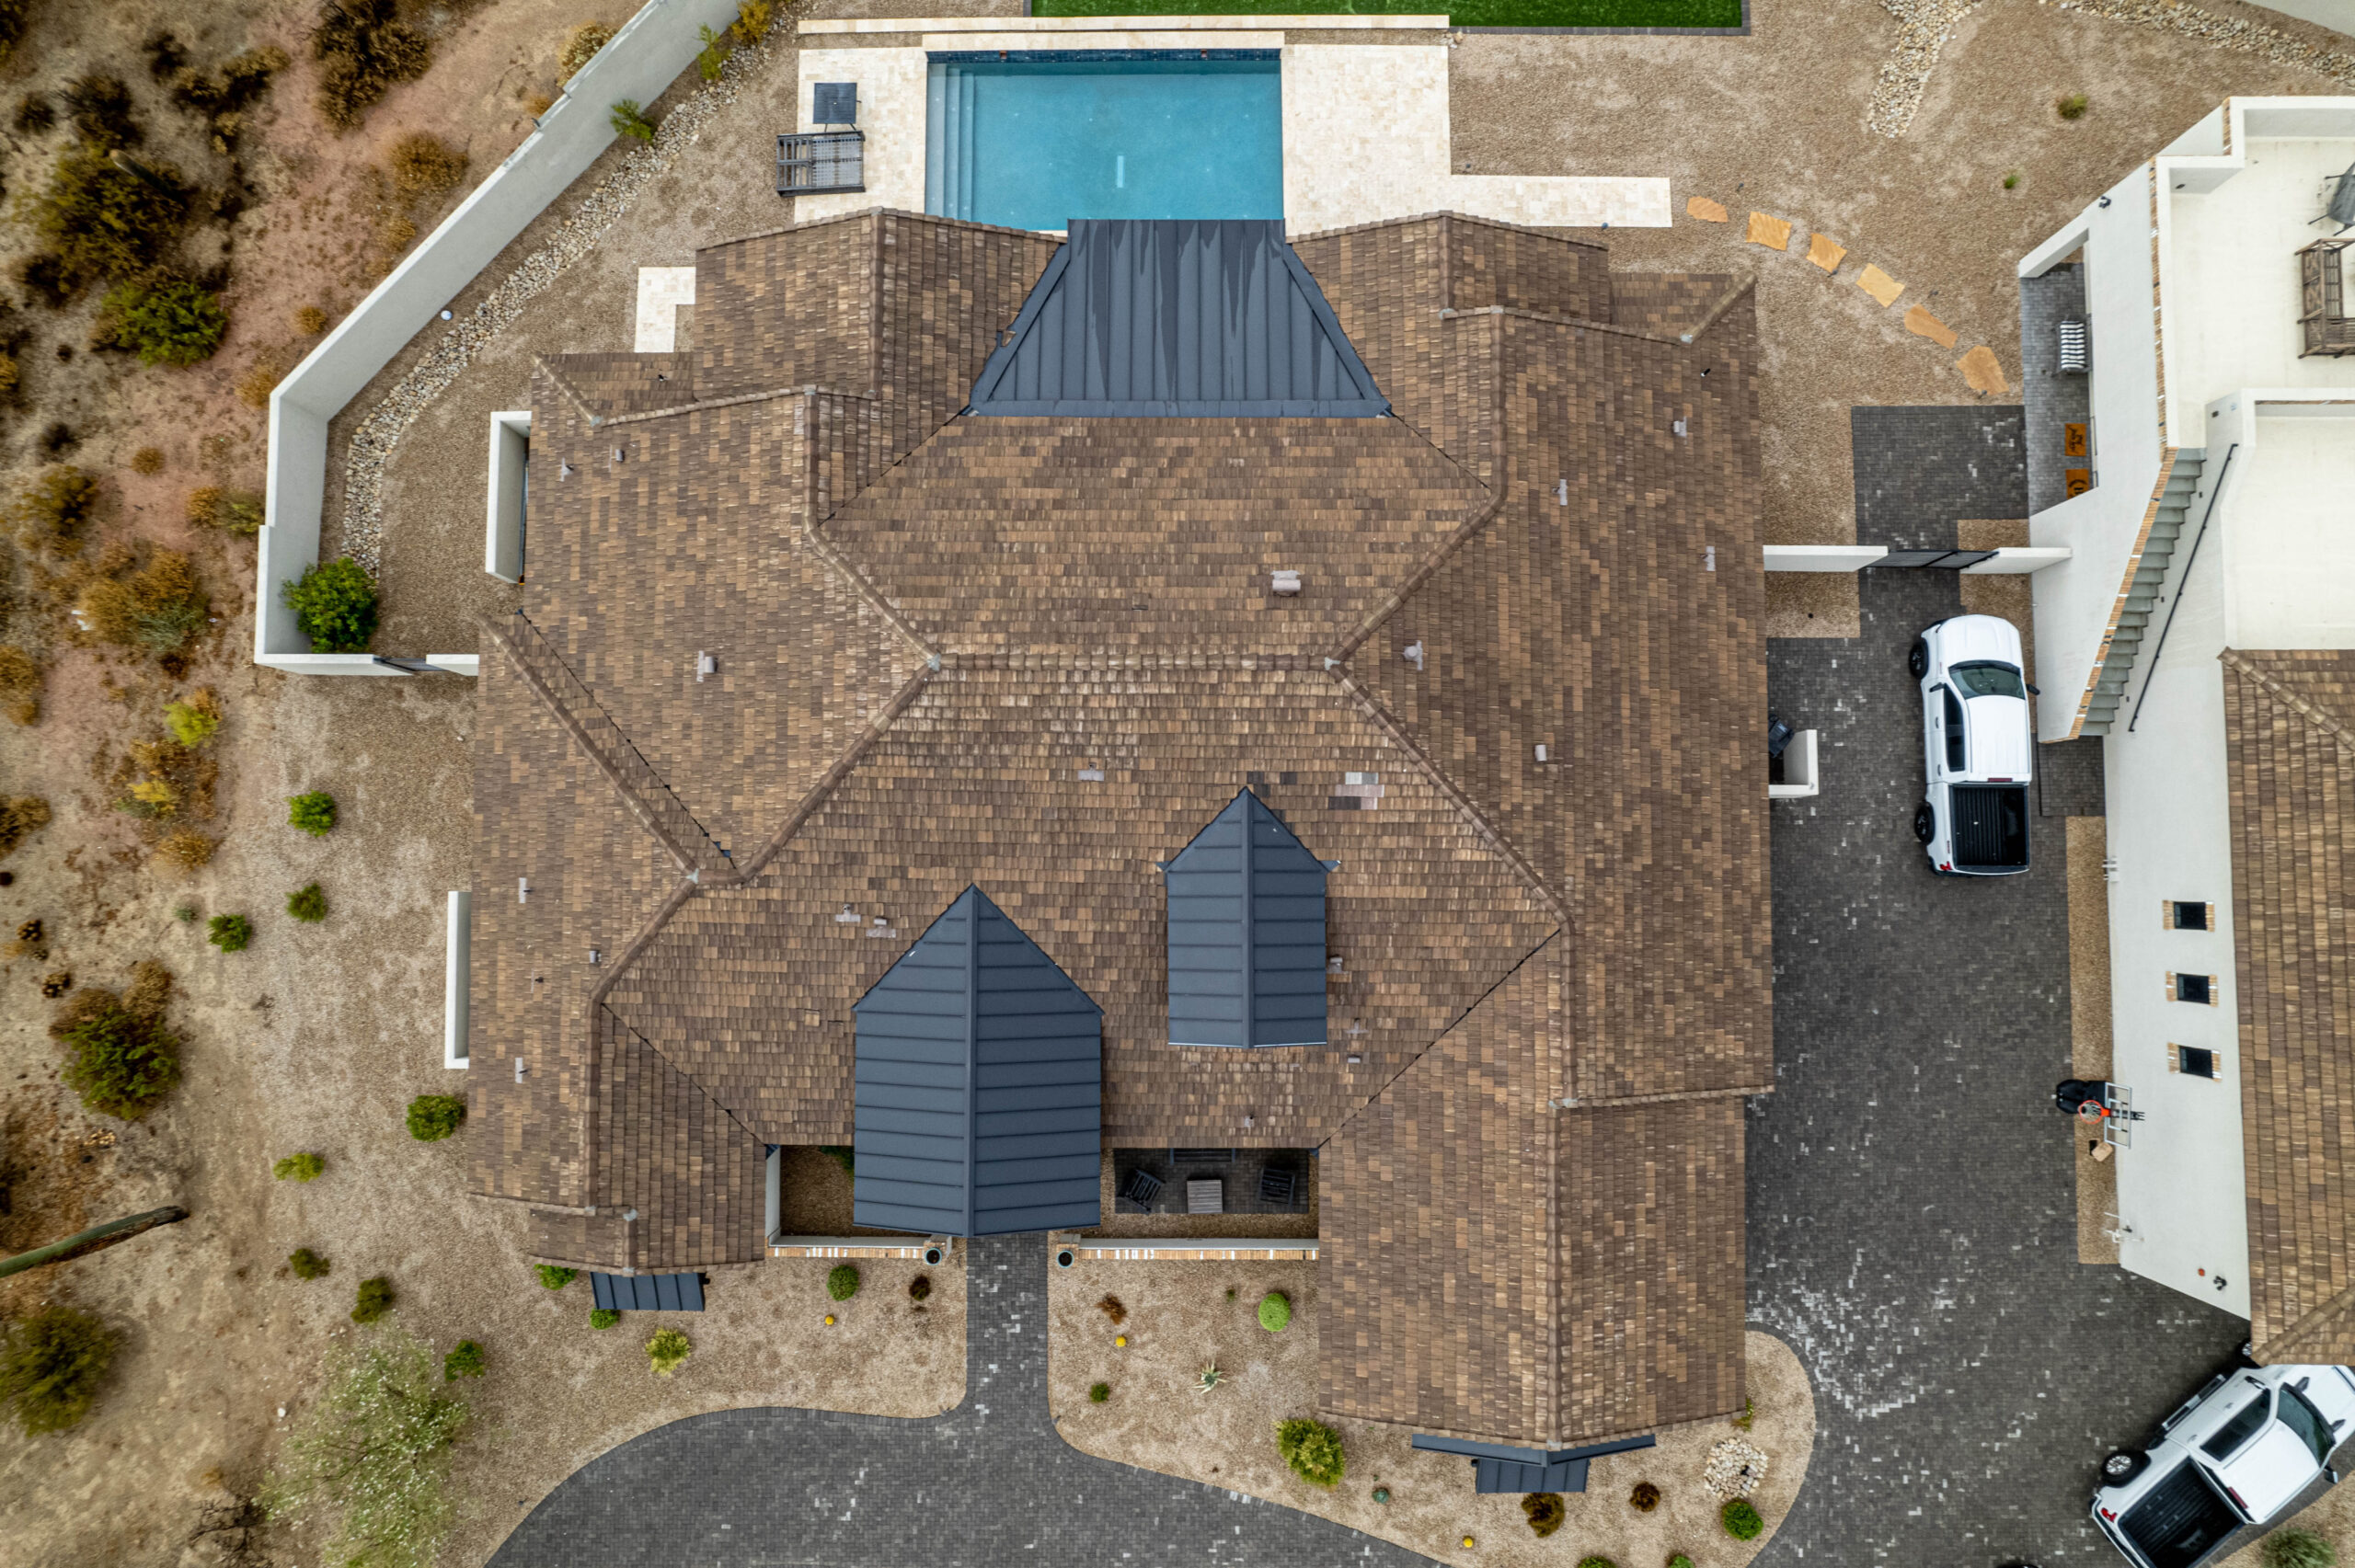 Bird's-eye view of Whisper Rock homes, accentuating the beauty of tiled roofs.